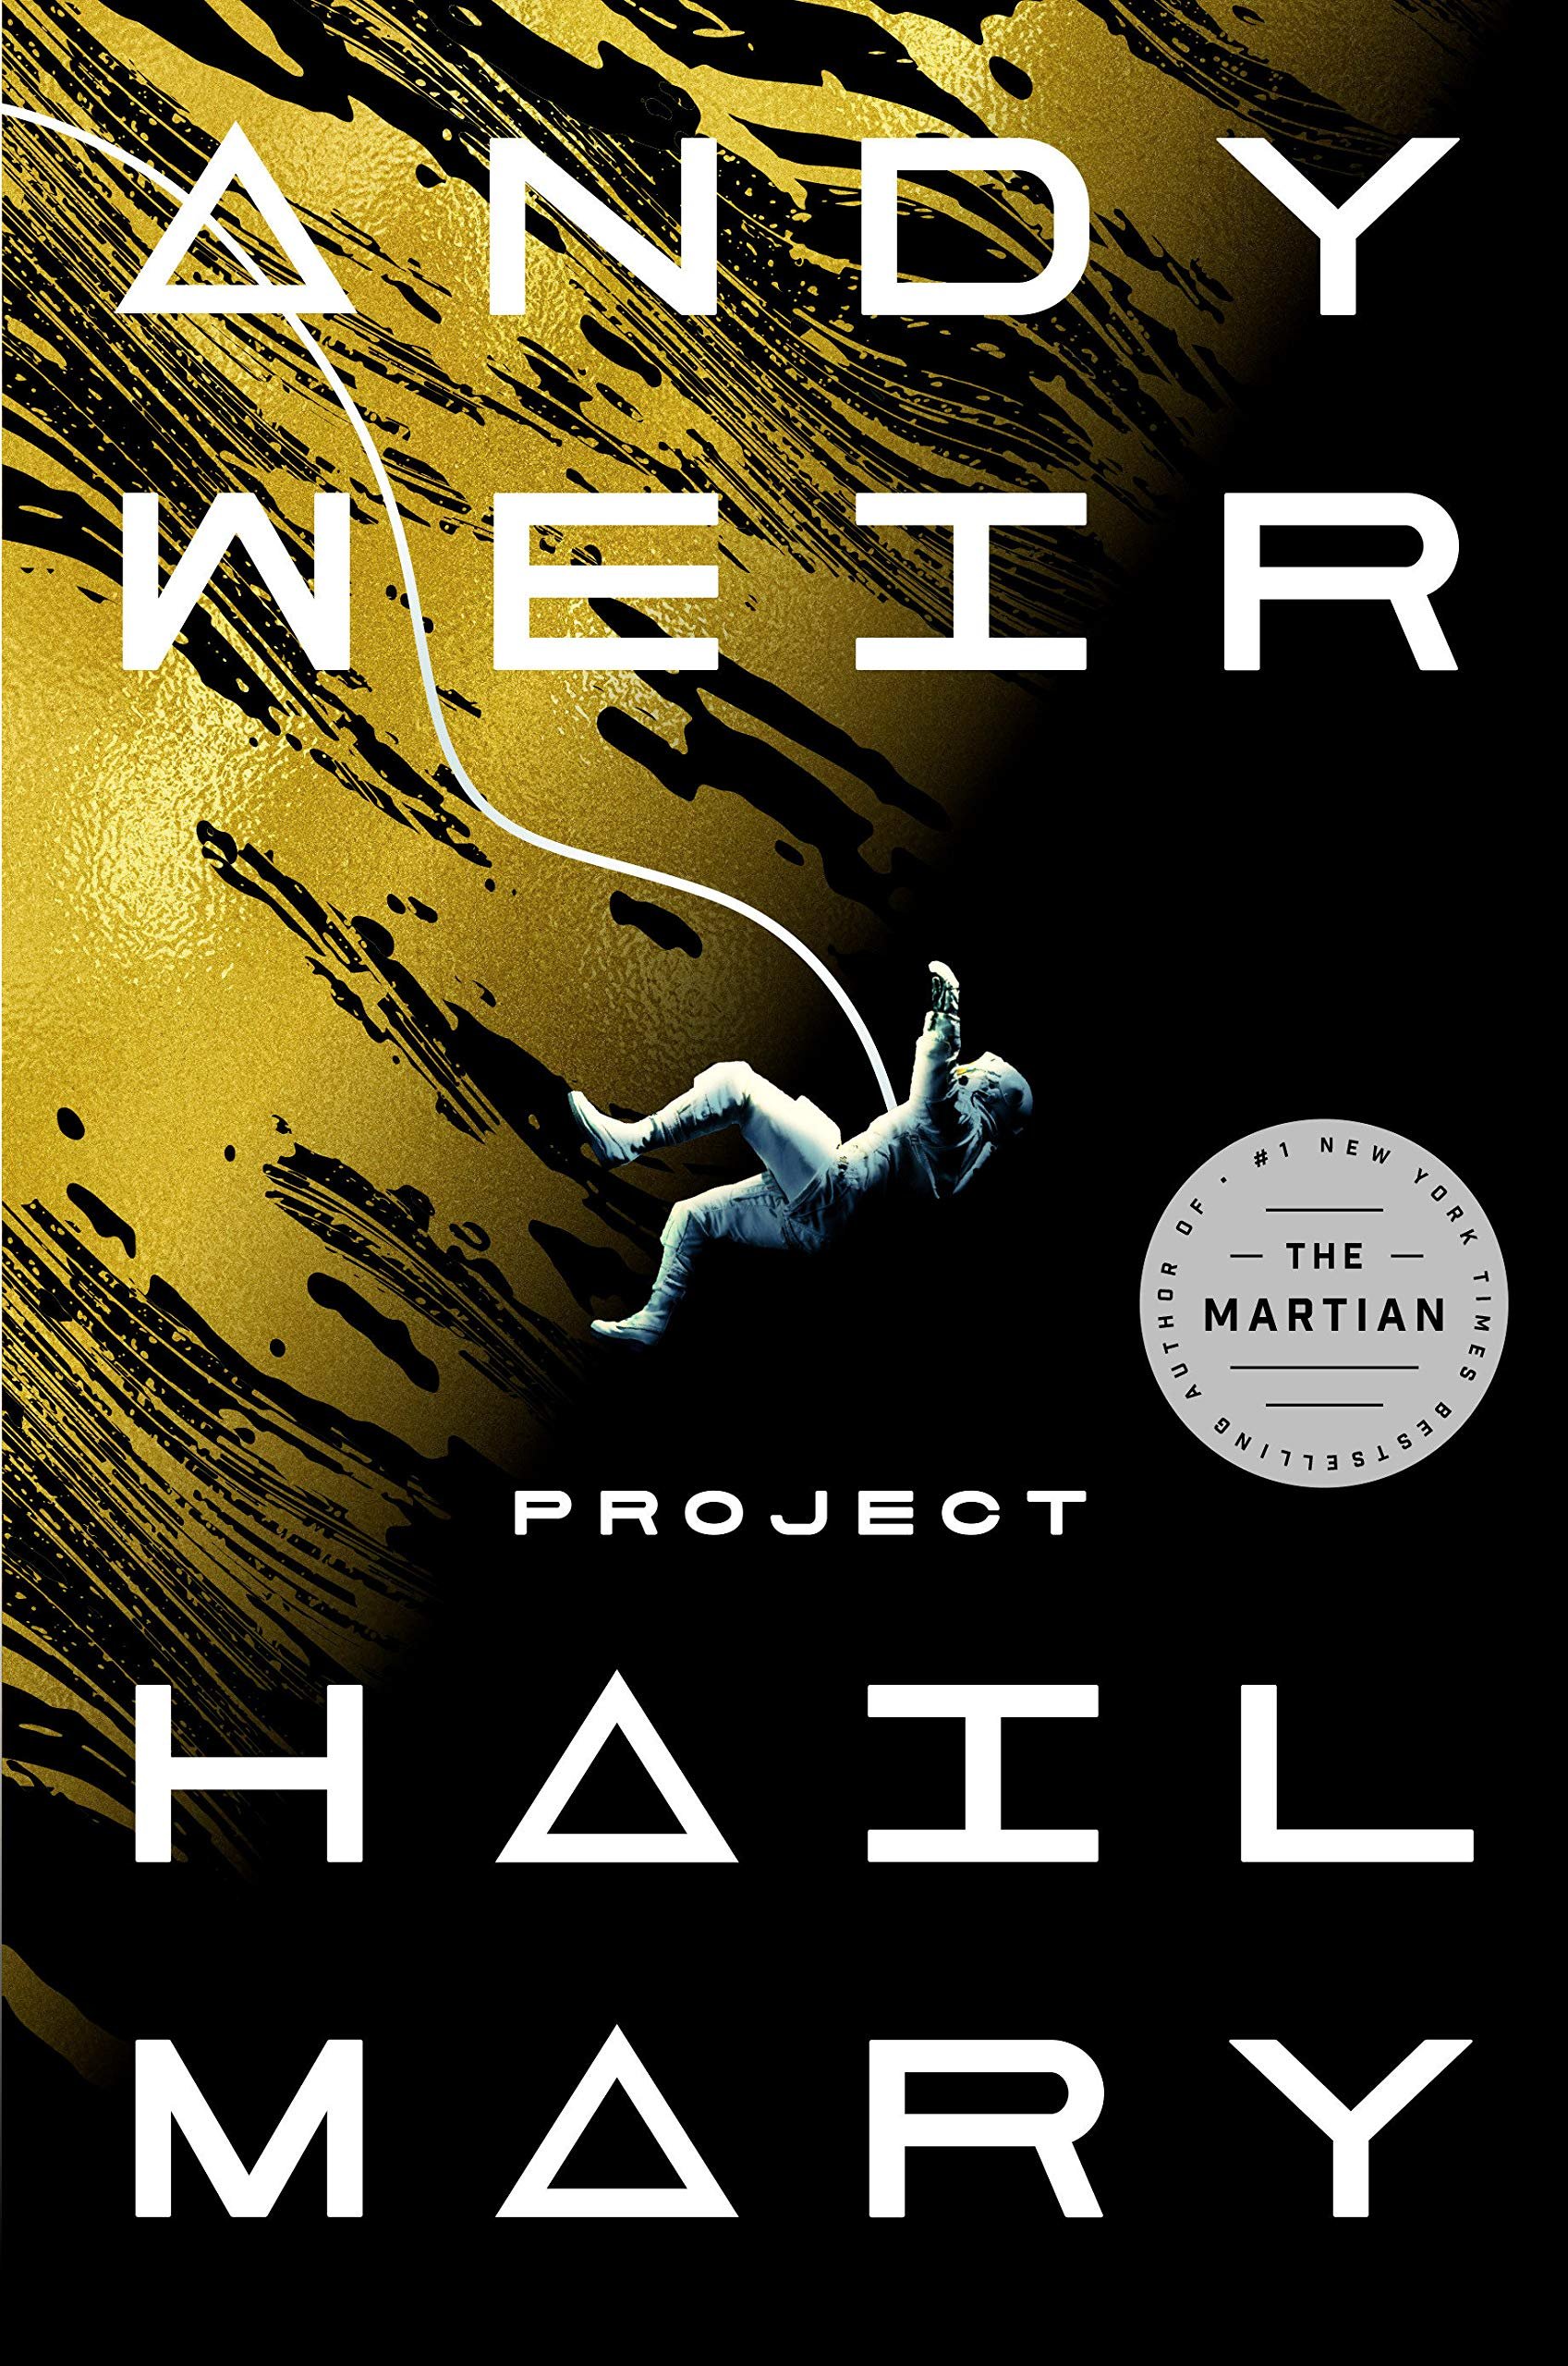 Project: Hail Mary, by Andy Weir